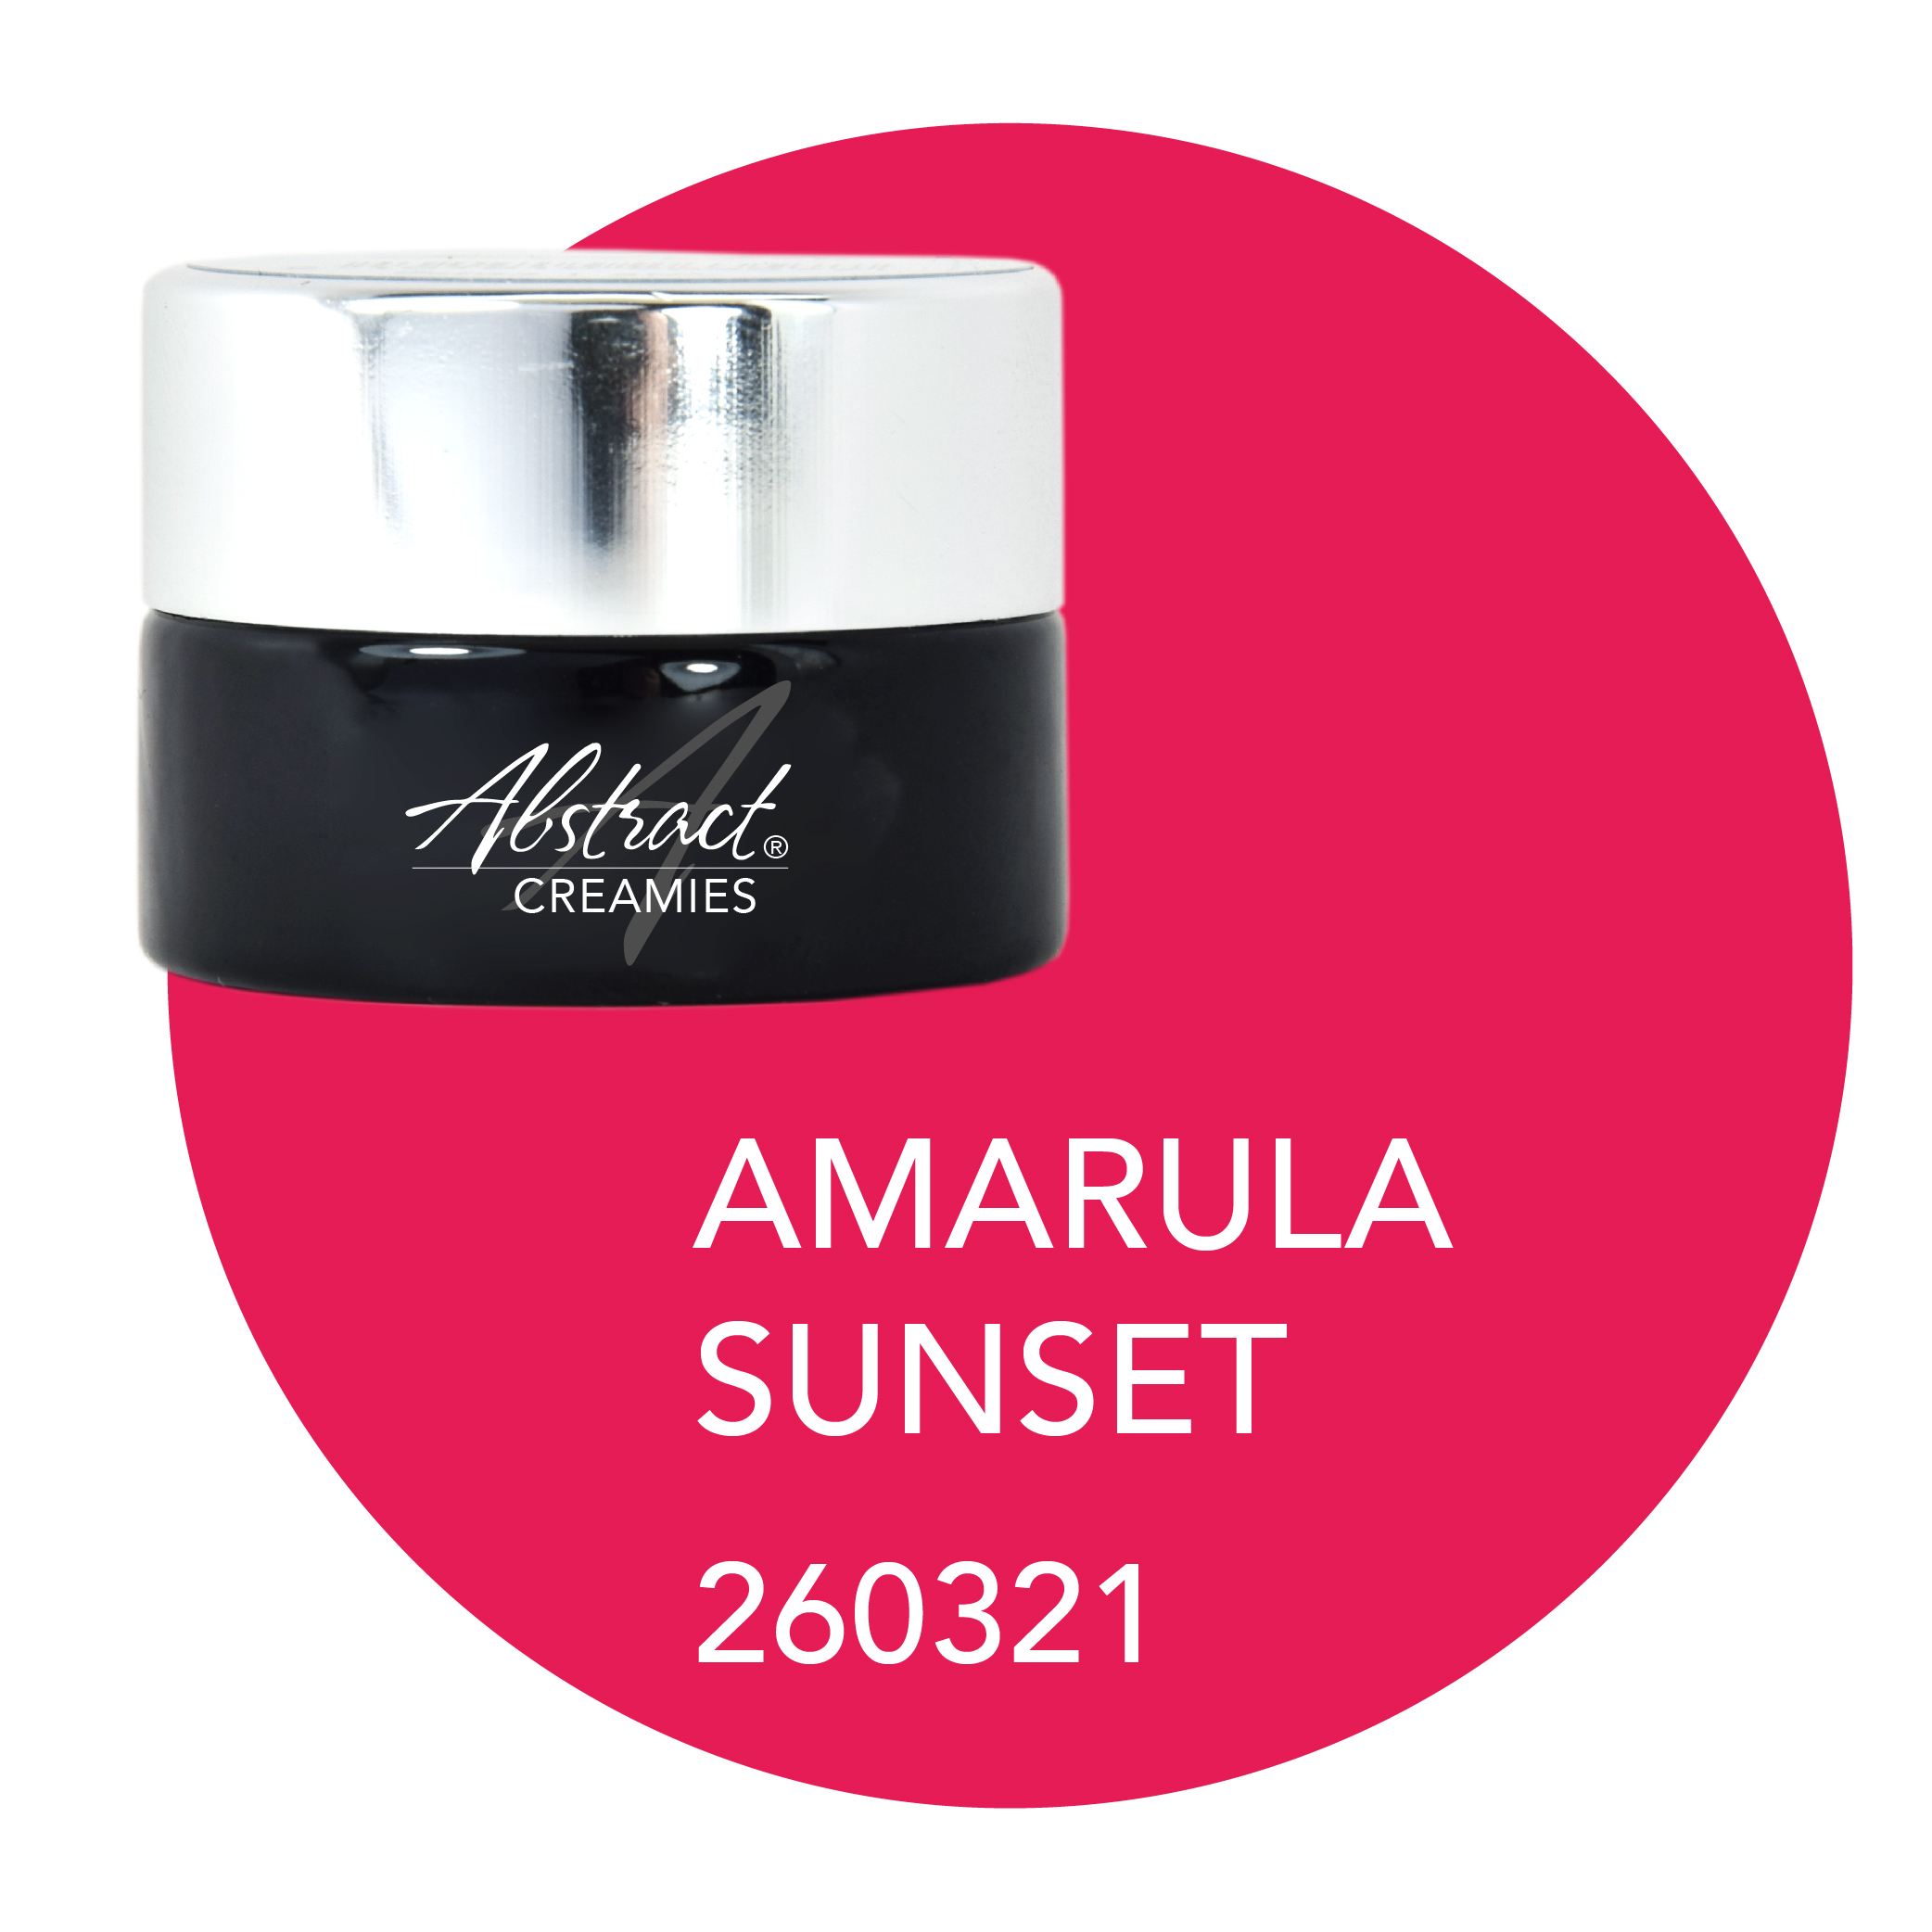 Amarula Sunset 5ml Creamies (Touch Of Carribean), Abstract | 260321